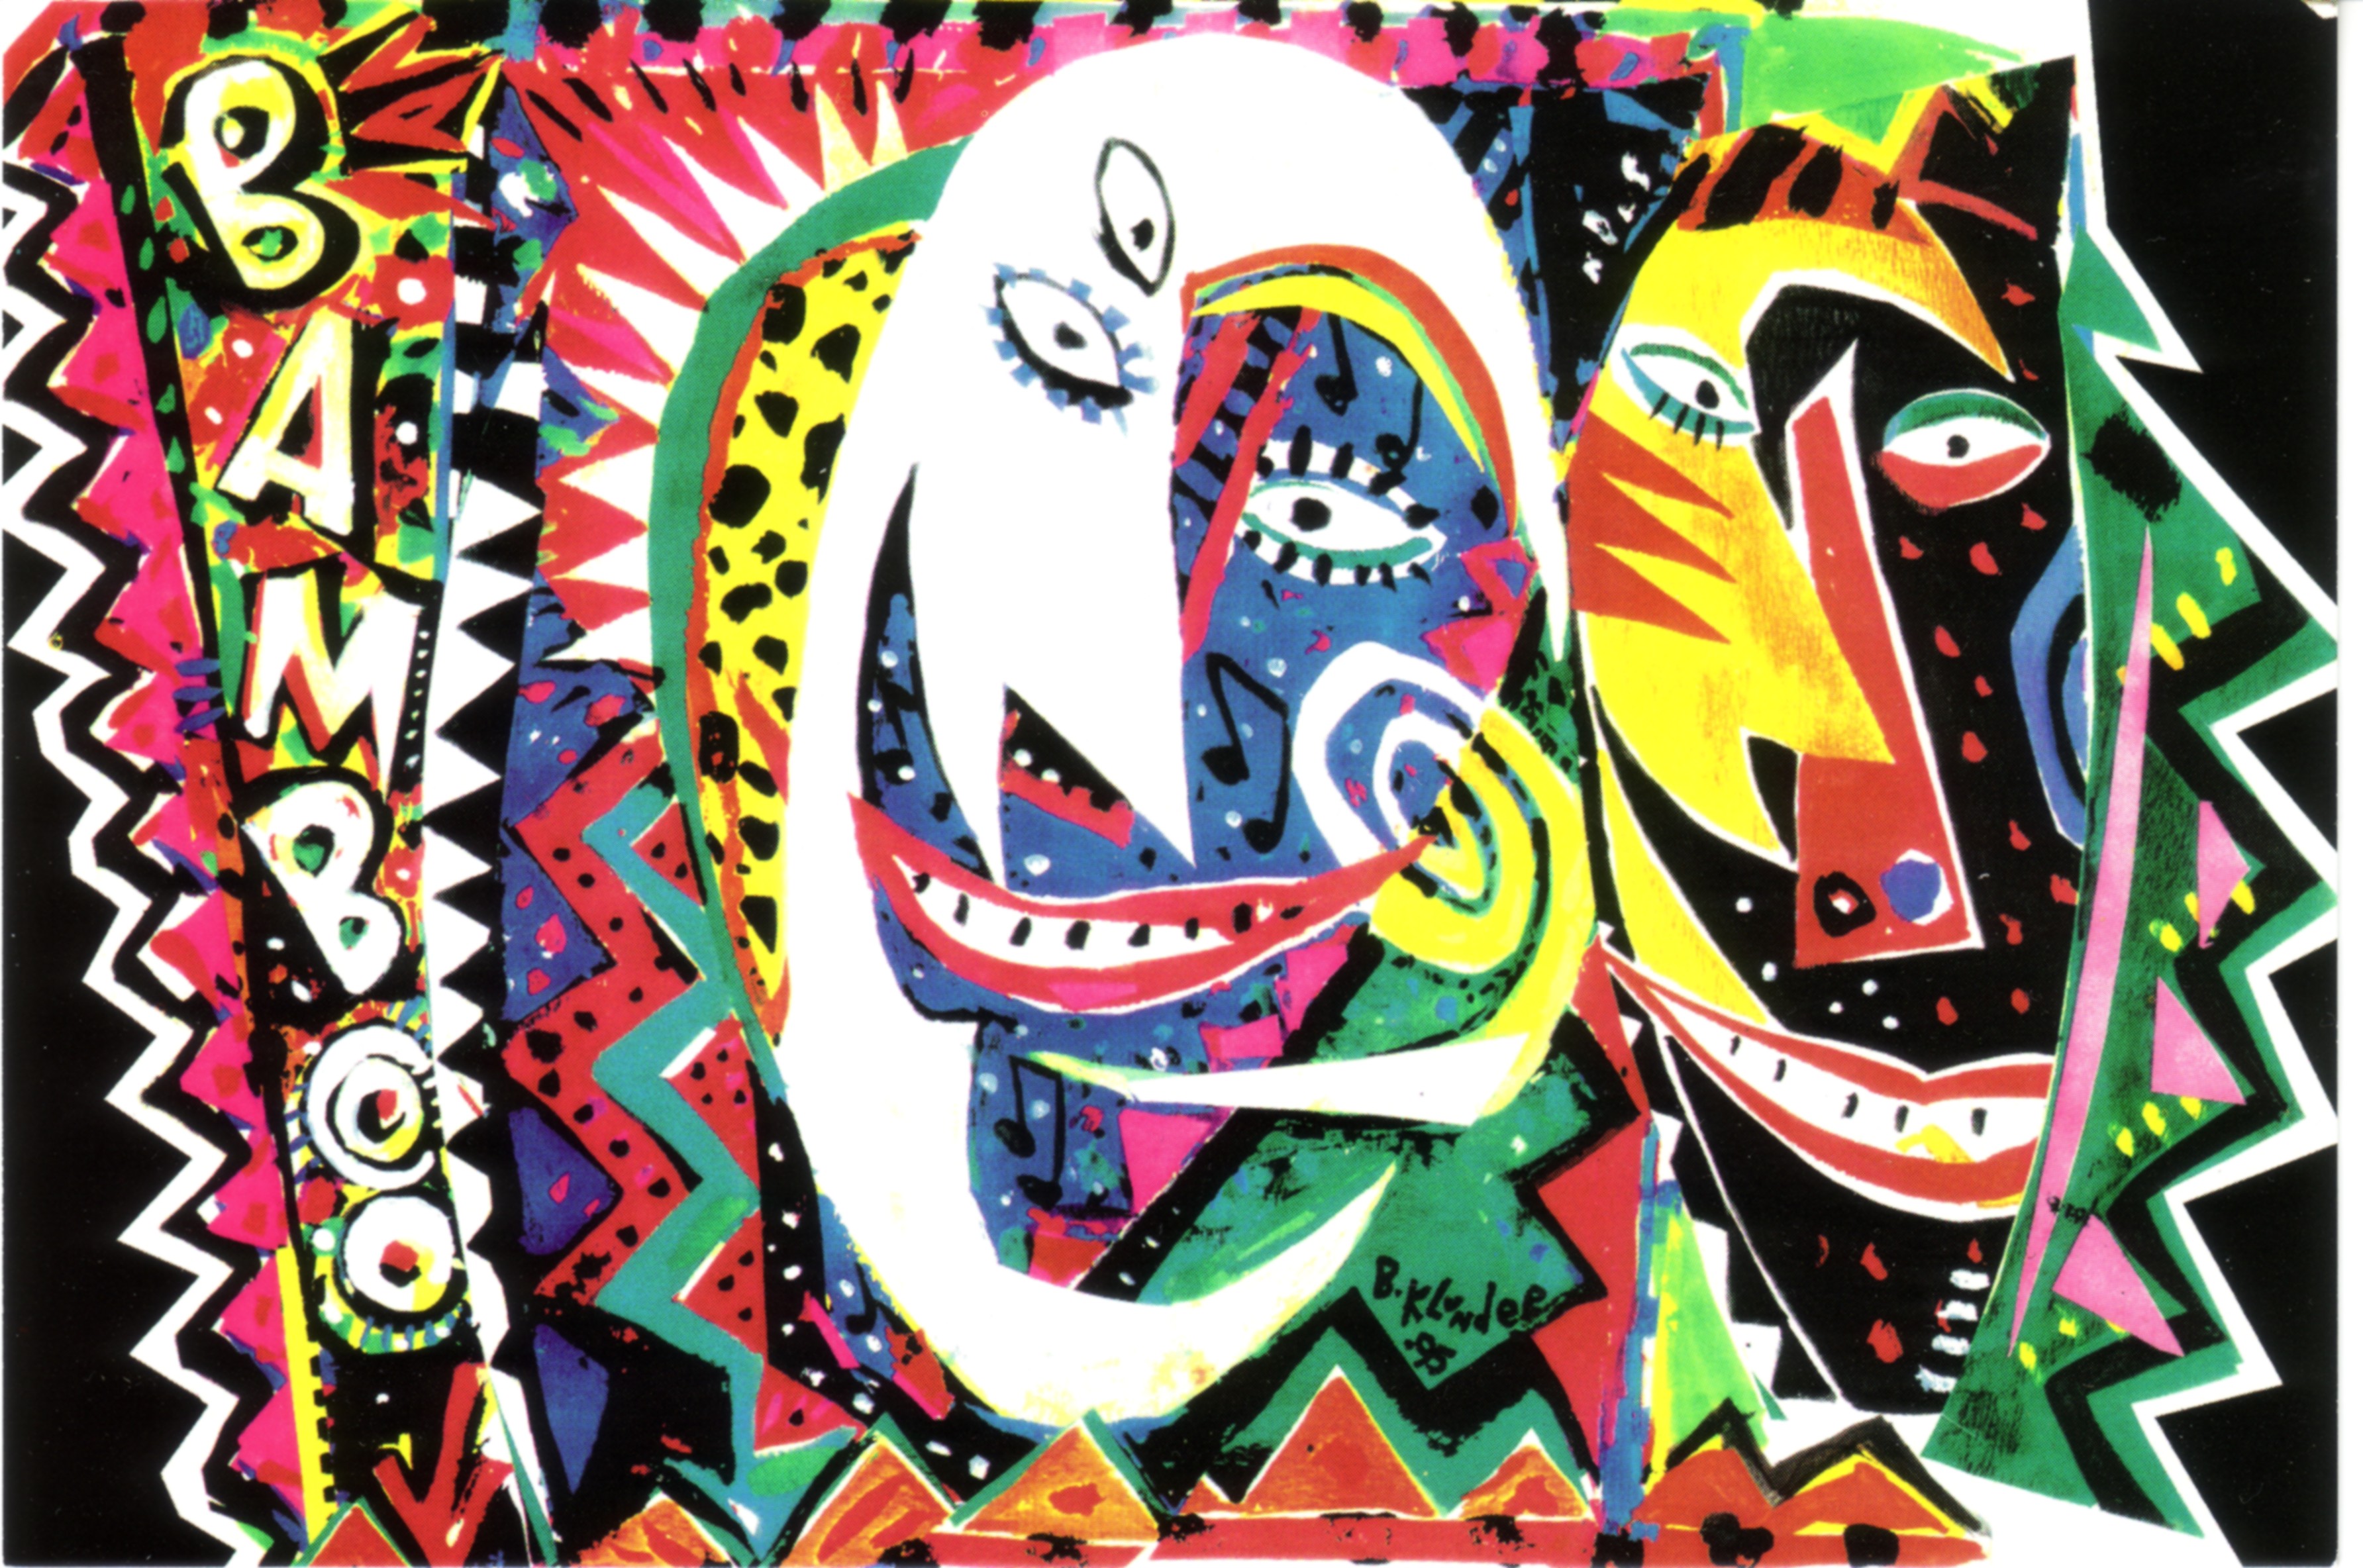 A colourful postcard featuring abstract and geometric faces. On the left the words “Bamboo” are written vertically. 